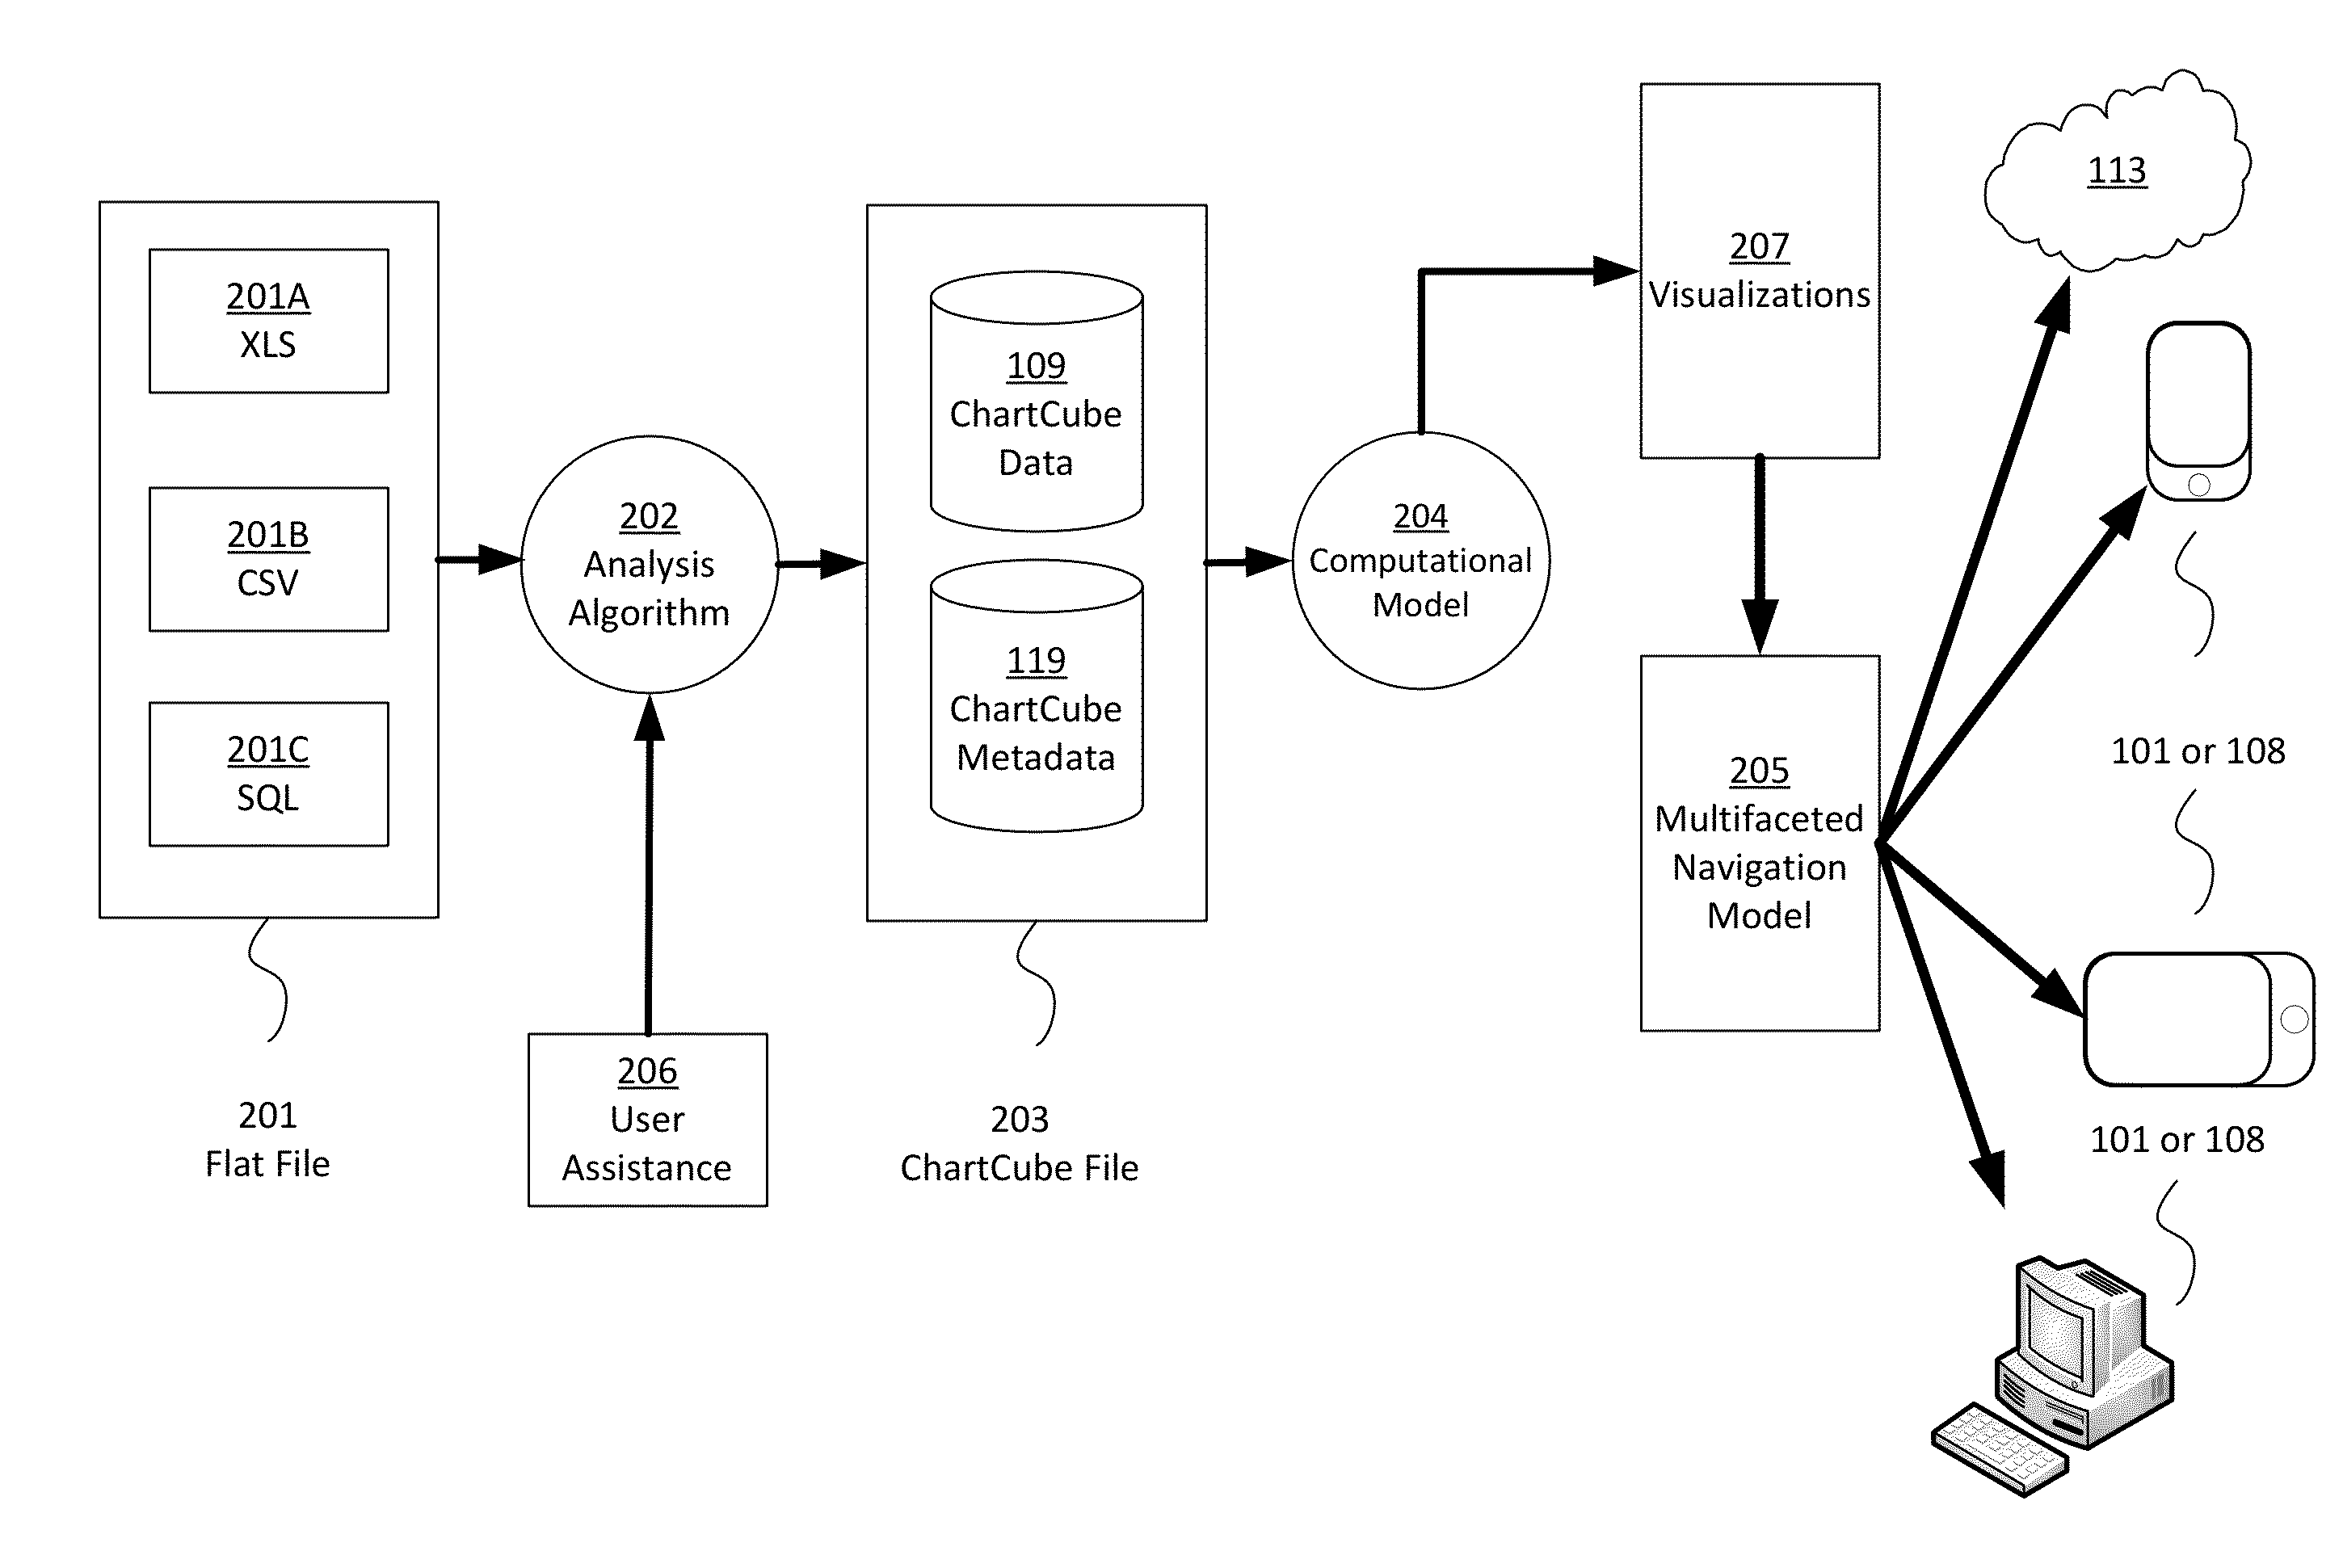 Generation of metadata and computational model for visual exploration system